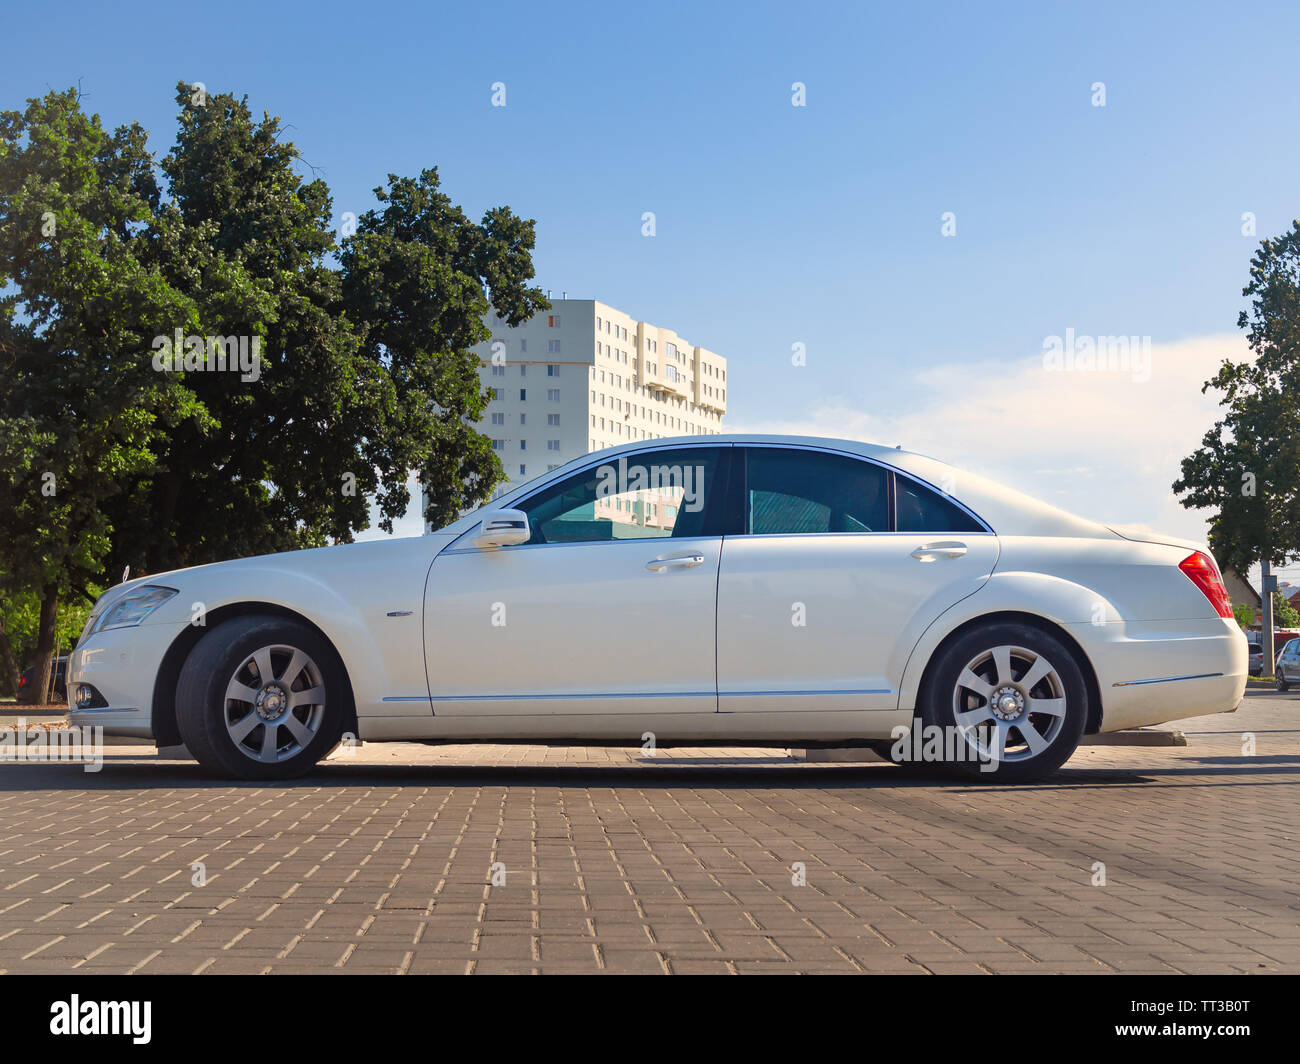 CHISINAU, MOLDOVA-JUNE 13, 2019: Fifth generation Mercedes-Benz S-Class (W221) at the city streets, side view Stock Photo